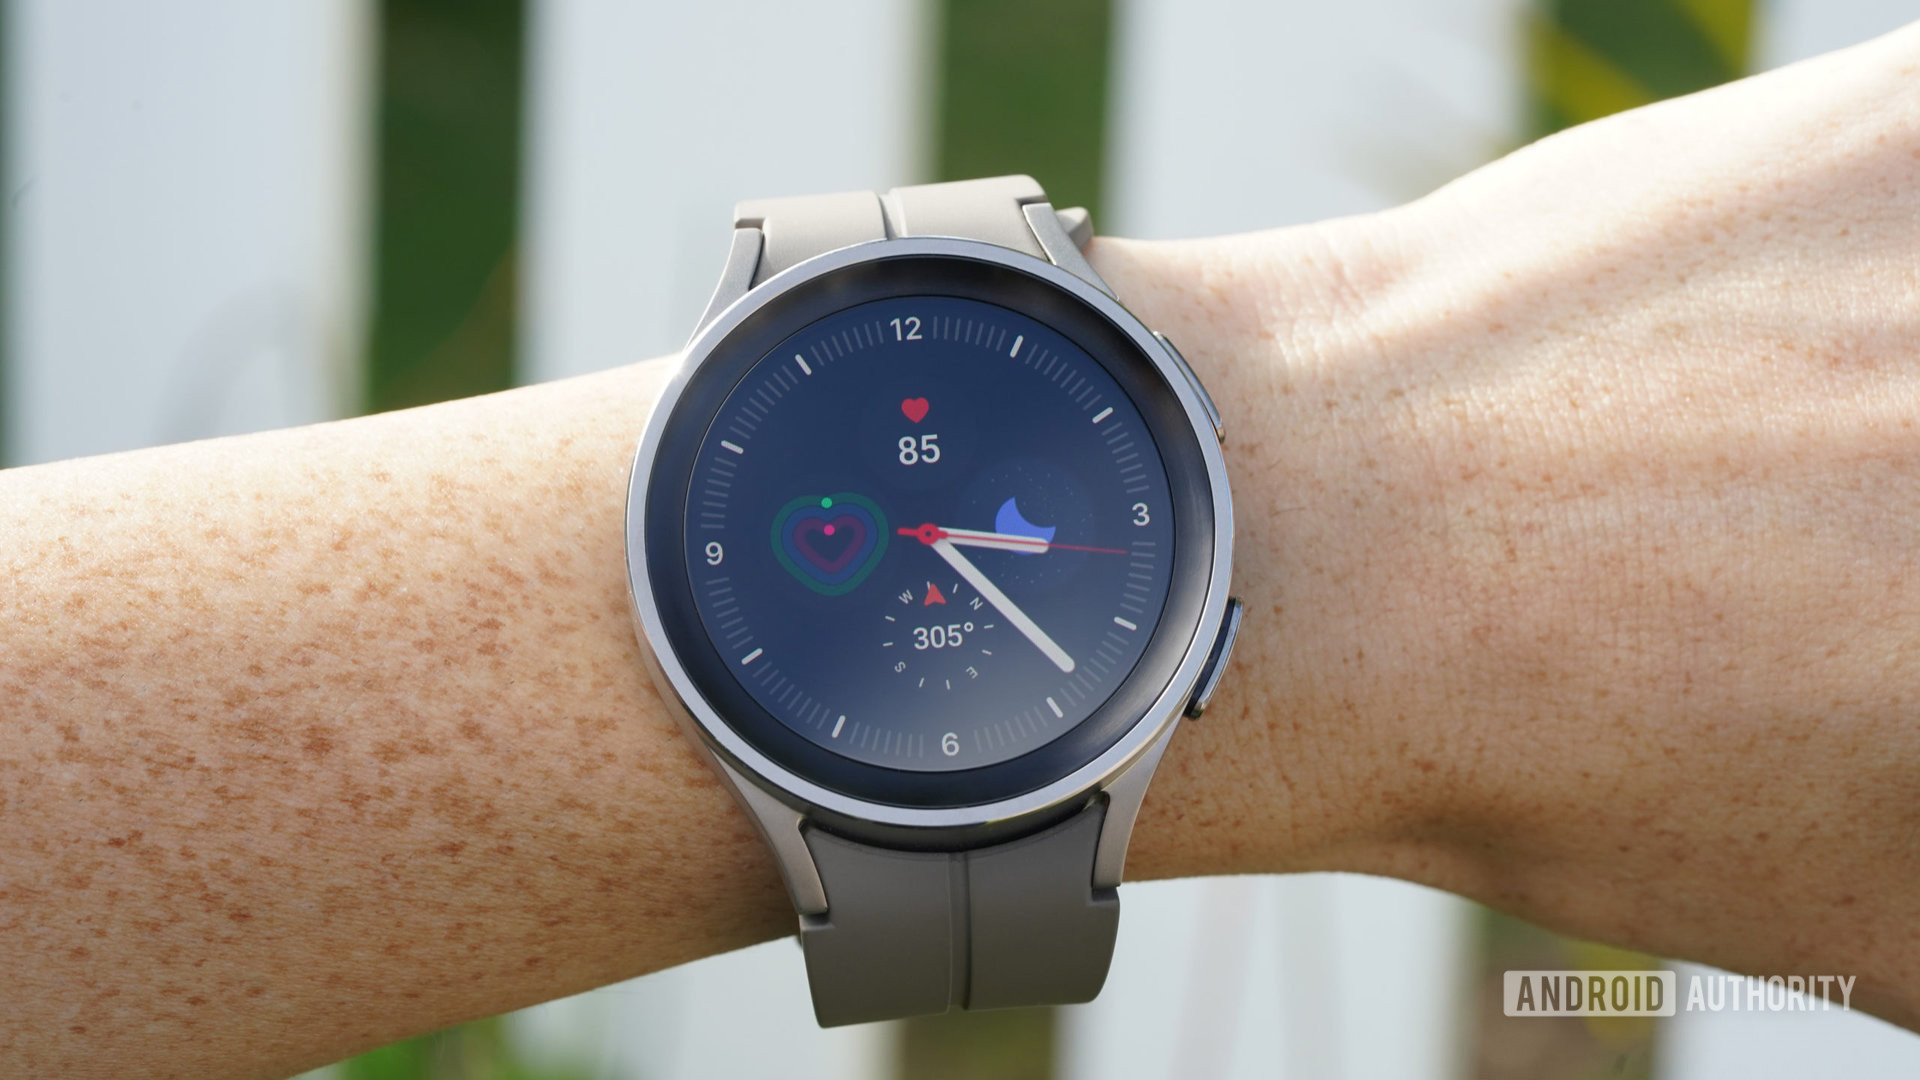 On the user's wrist, the Galaxy Watch 5 Pro displays the watch face.